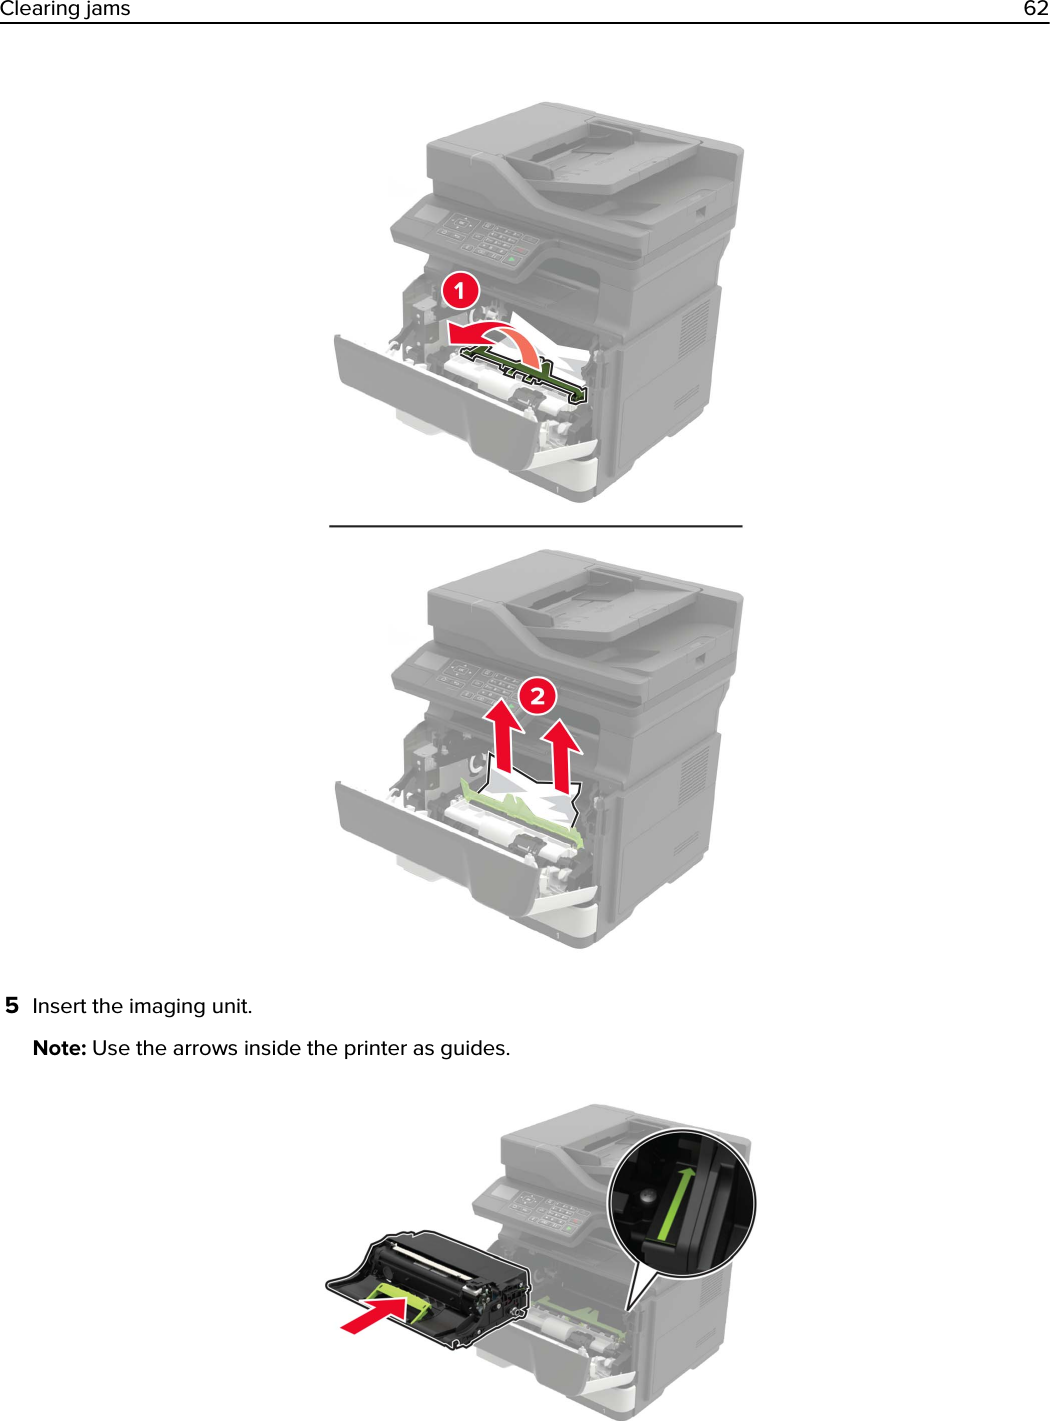 5Insert the imaging unit.Note: Use the arrows inside the printer as guides.Clearing jams 62